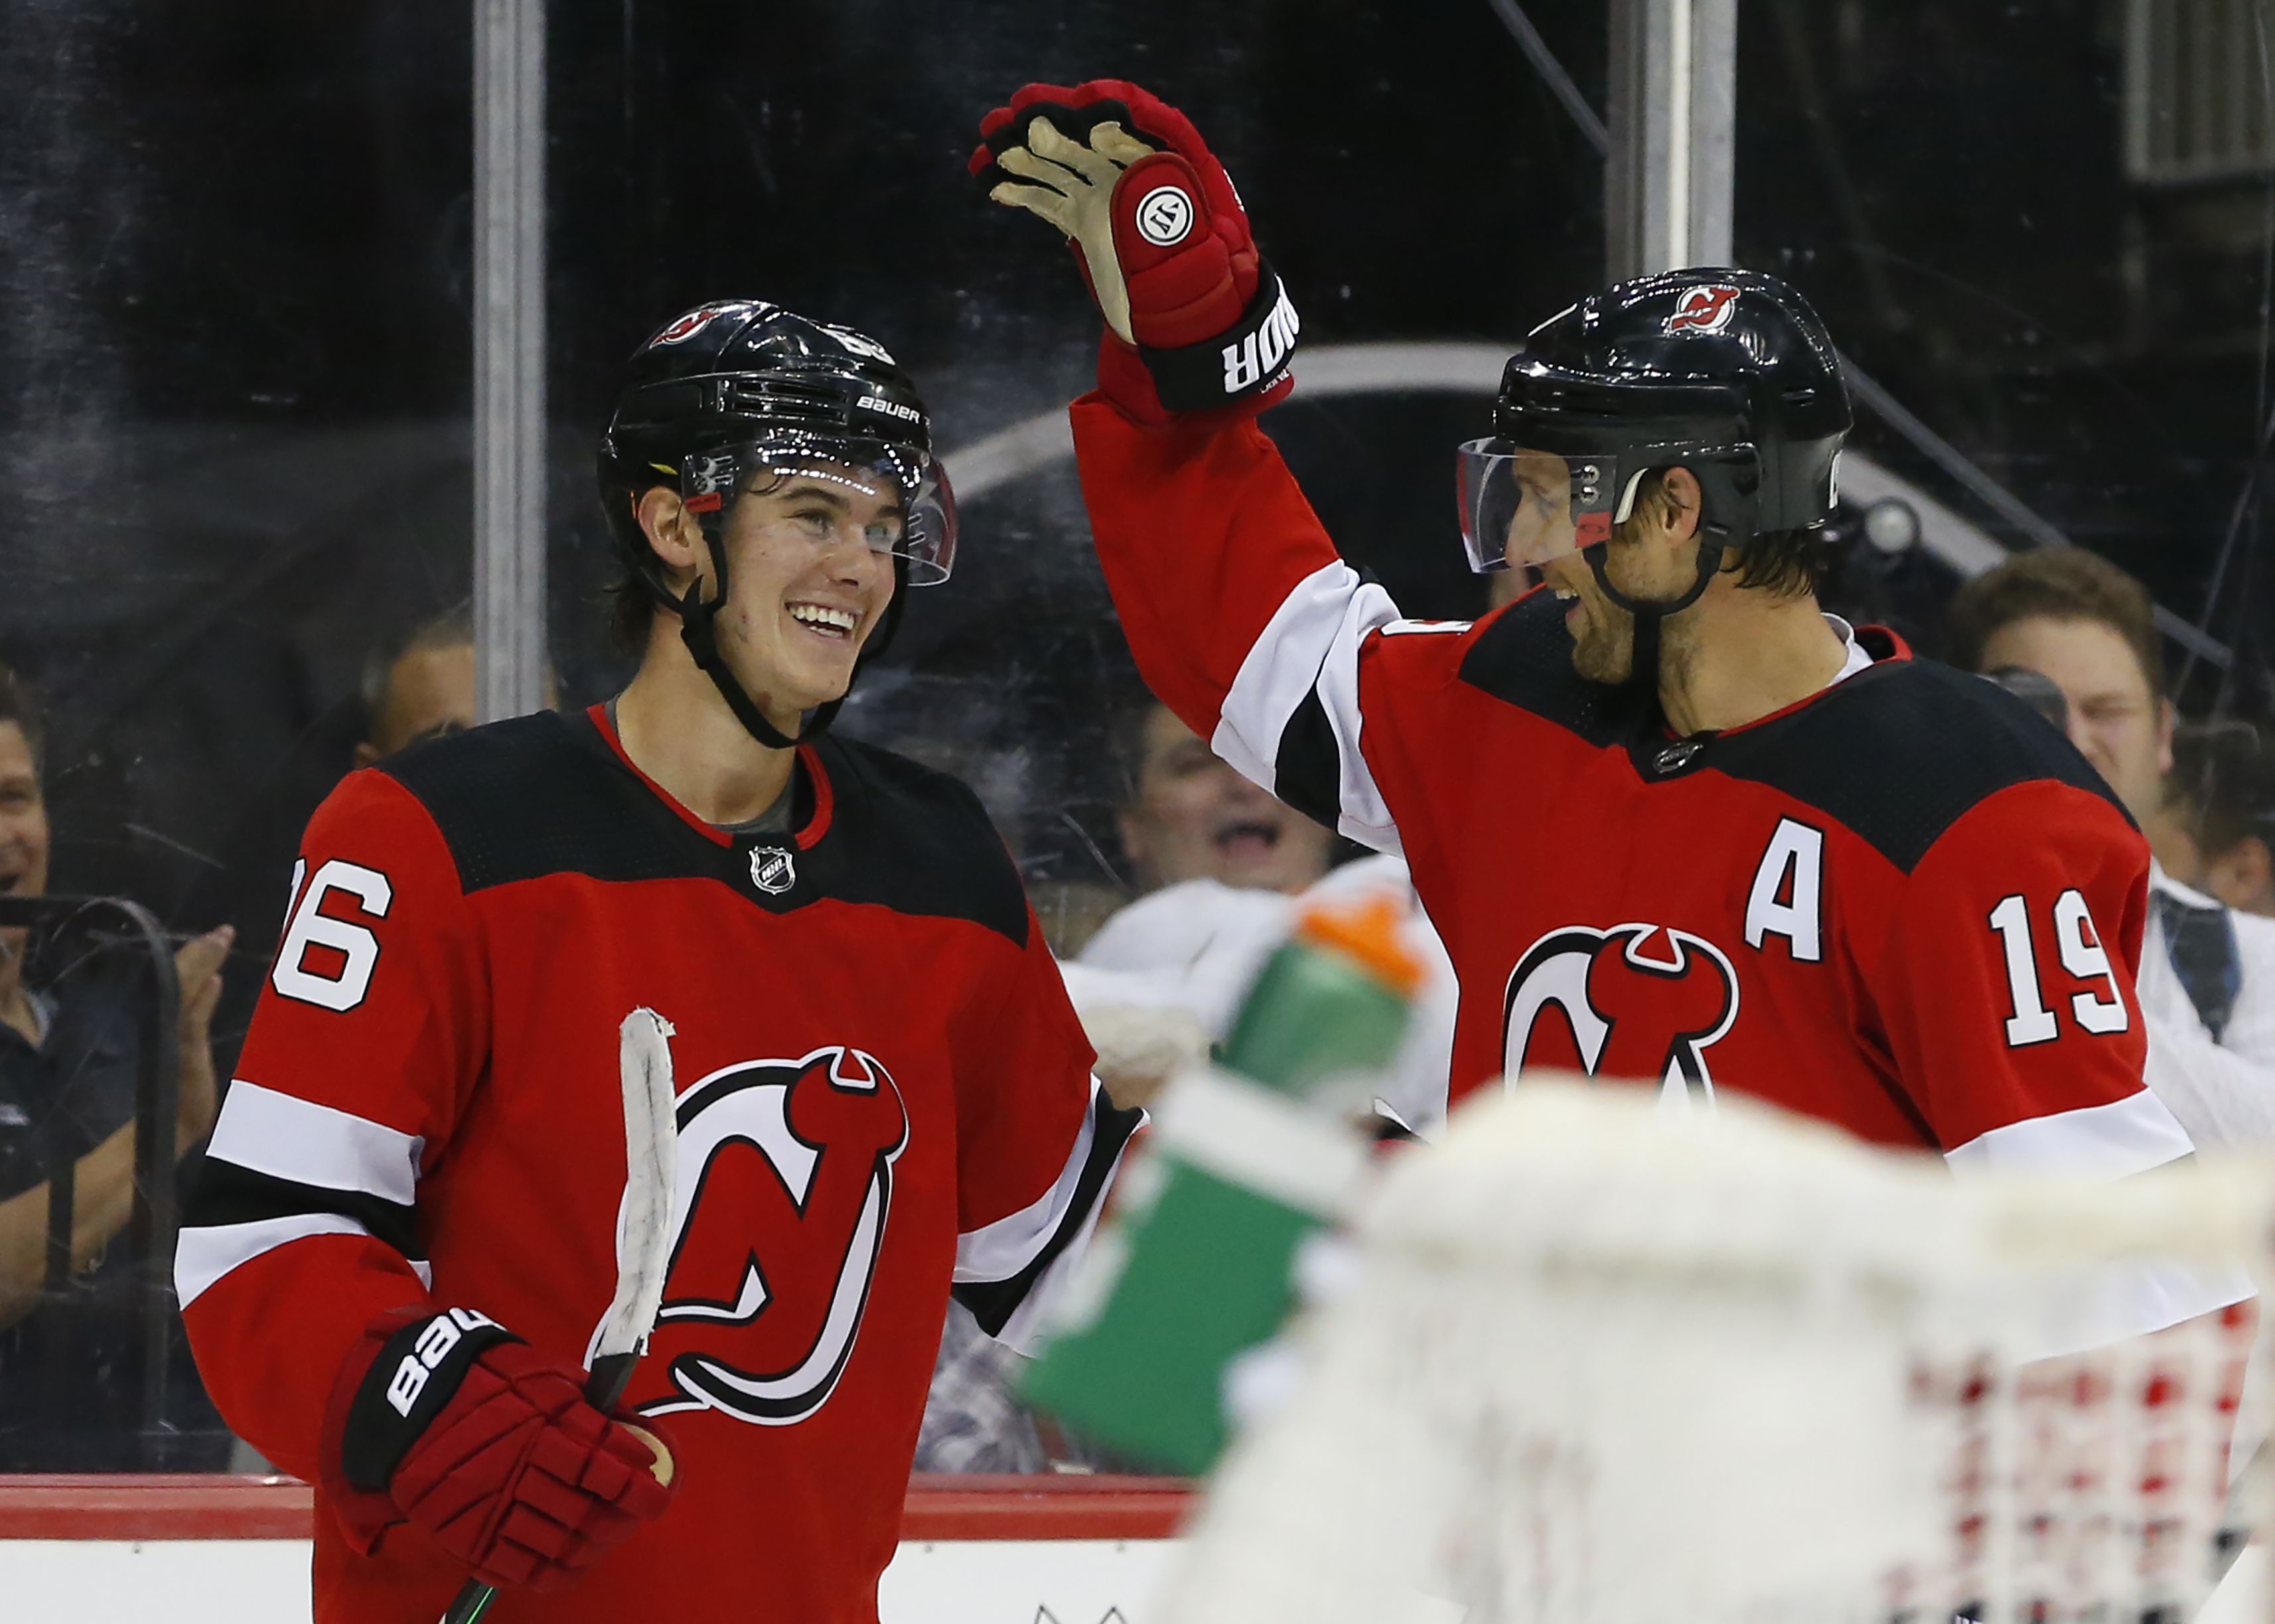 Jack Hughes scores second goal of game in OT as Devils beat